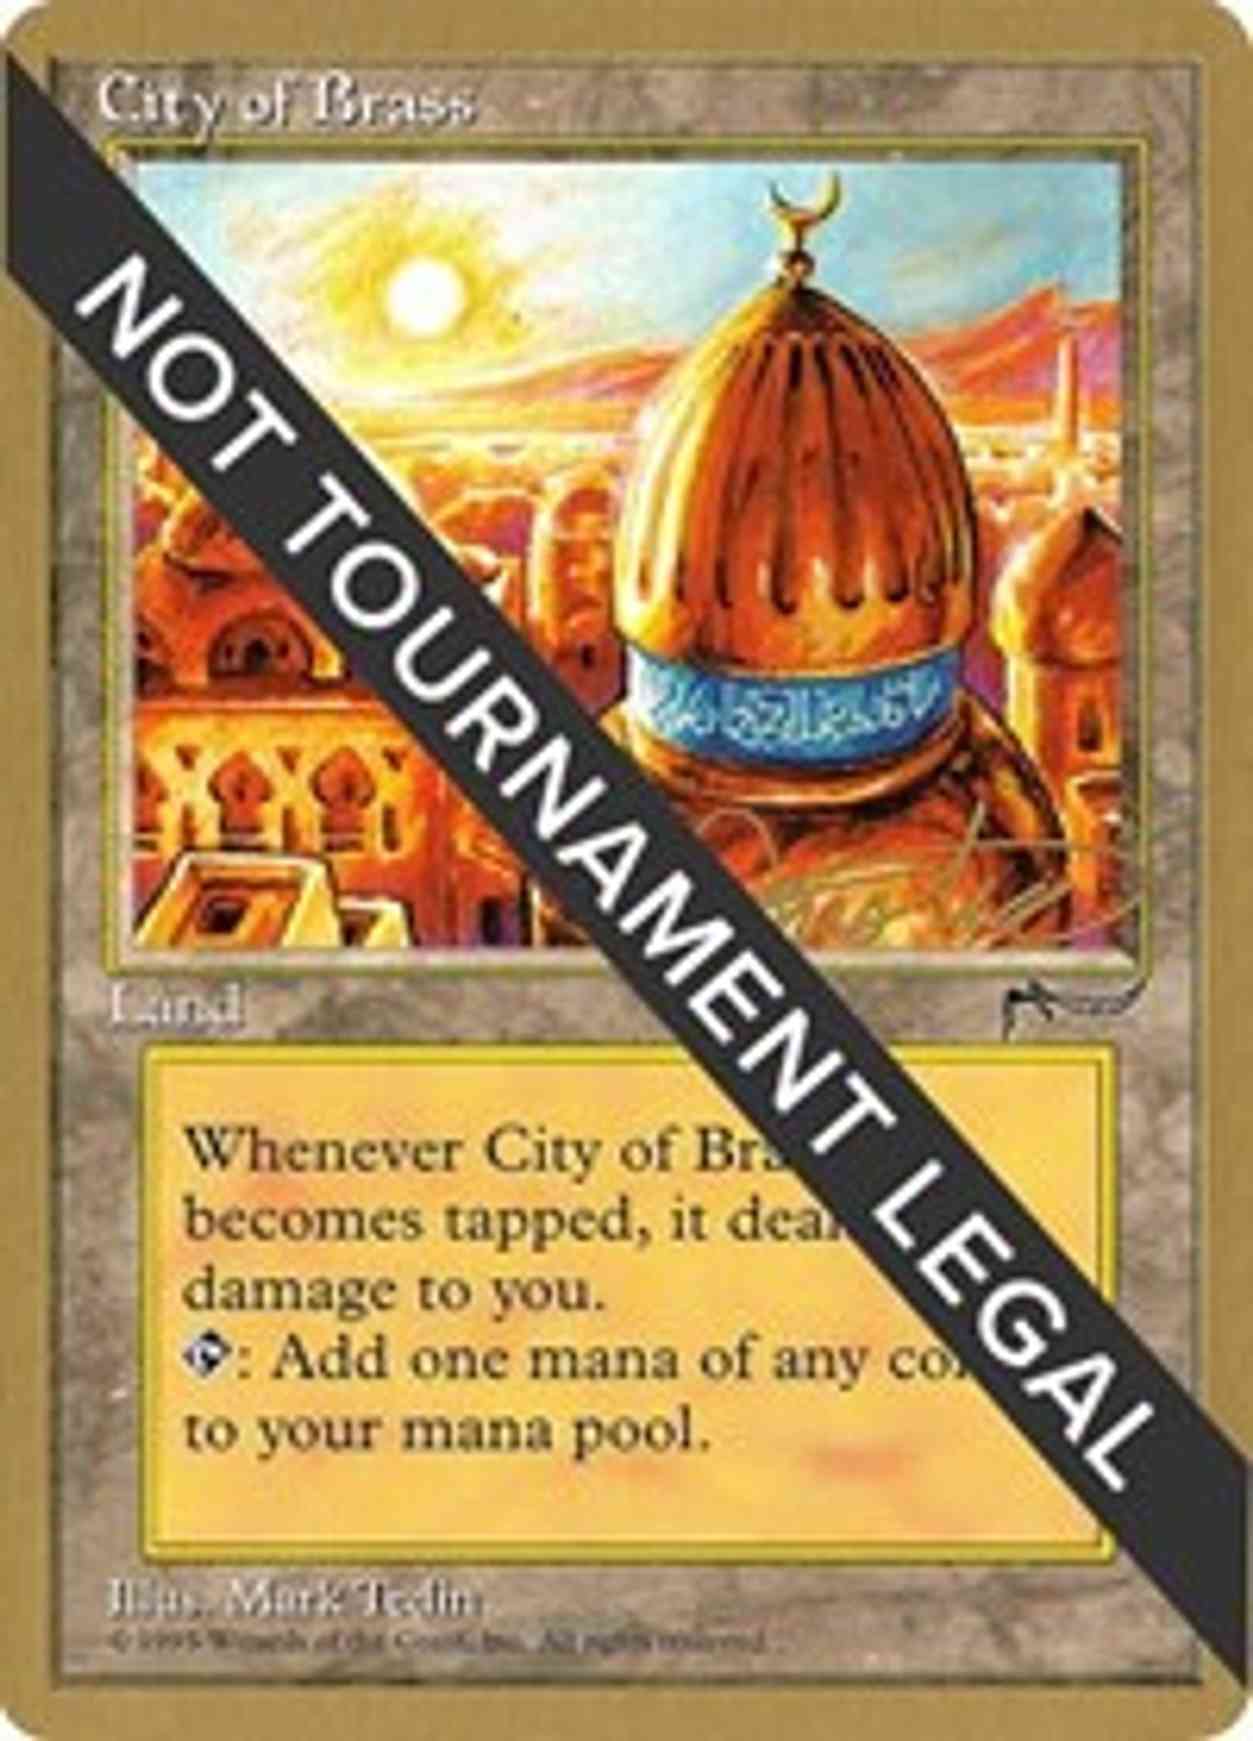 City of Brass - 1996 George Baxter (ARN) magic card front